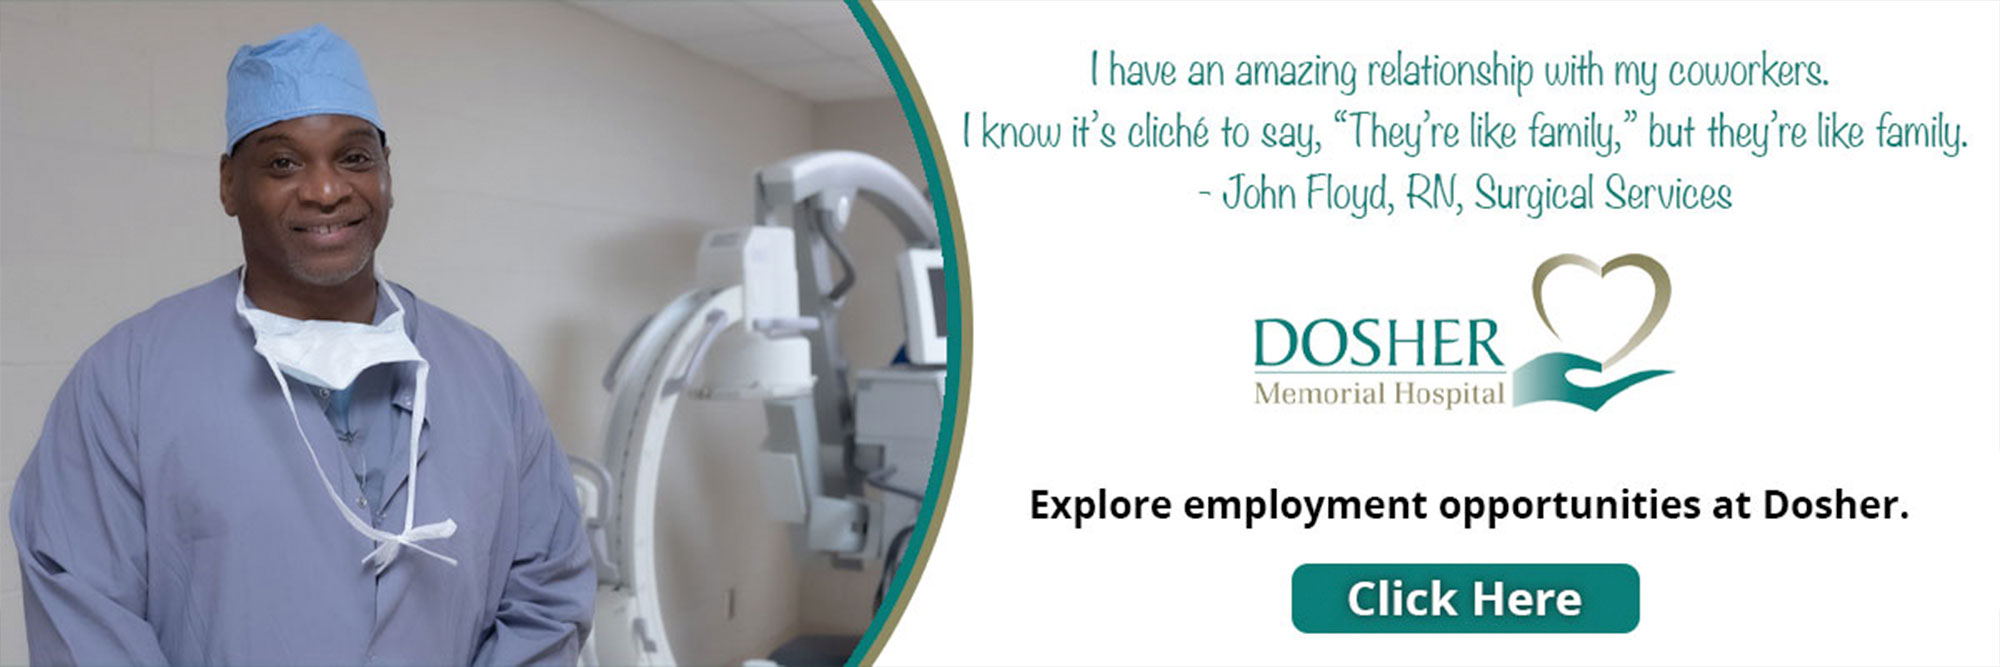 I have an amazing relationship with my coworkers. I know it's cliche to say, "They're like family," but they're like family.
- John Floyd, RN, Surgical Services

Explore employment opportunities at Dosher